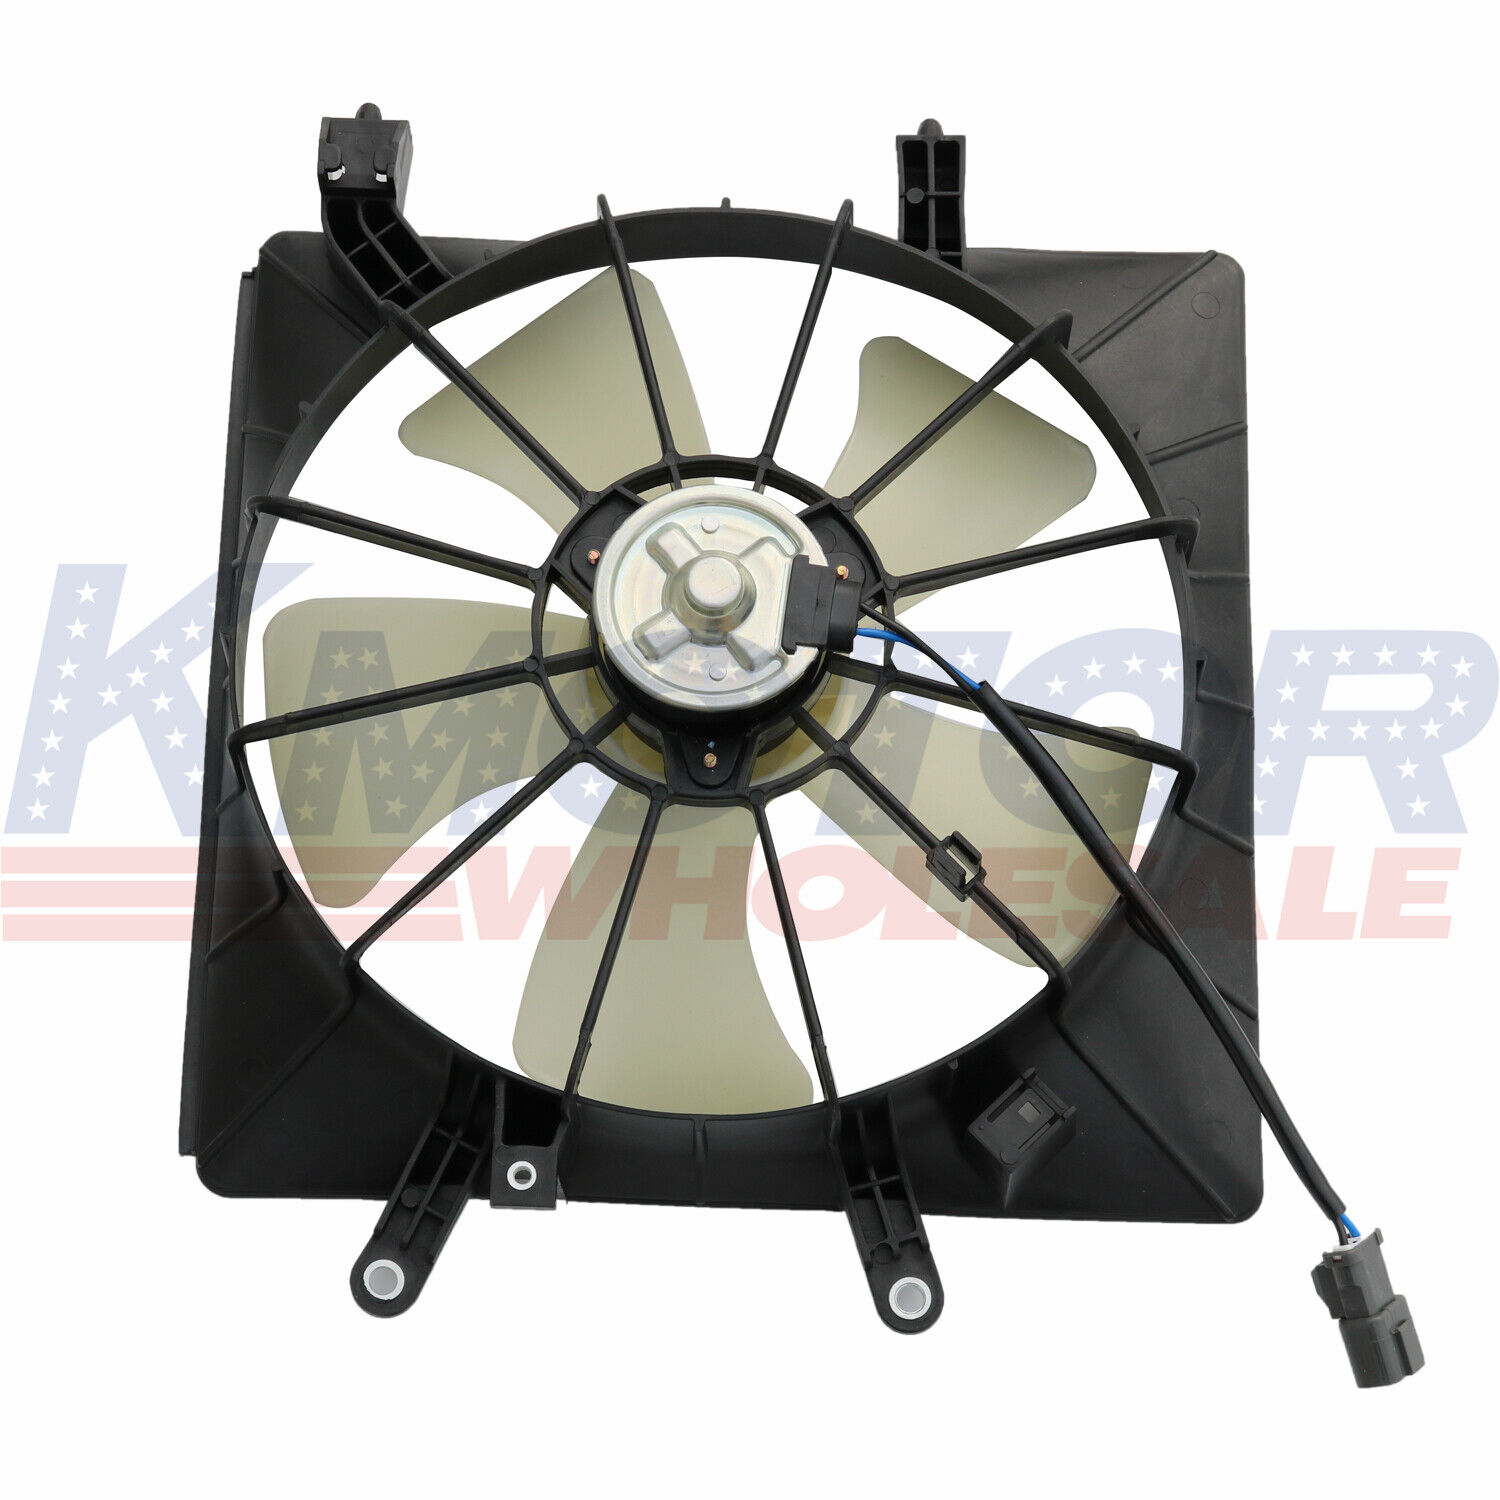 Radiator Cooling Fan 620-219 9599445 Right Side Fit For Honda Civic 2001-2005